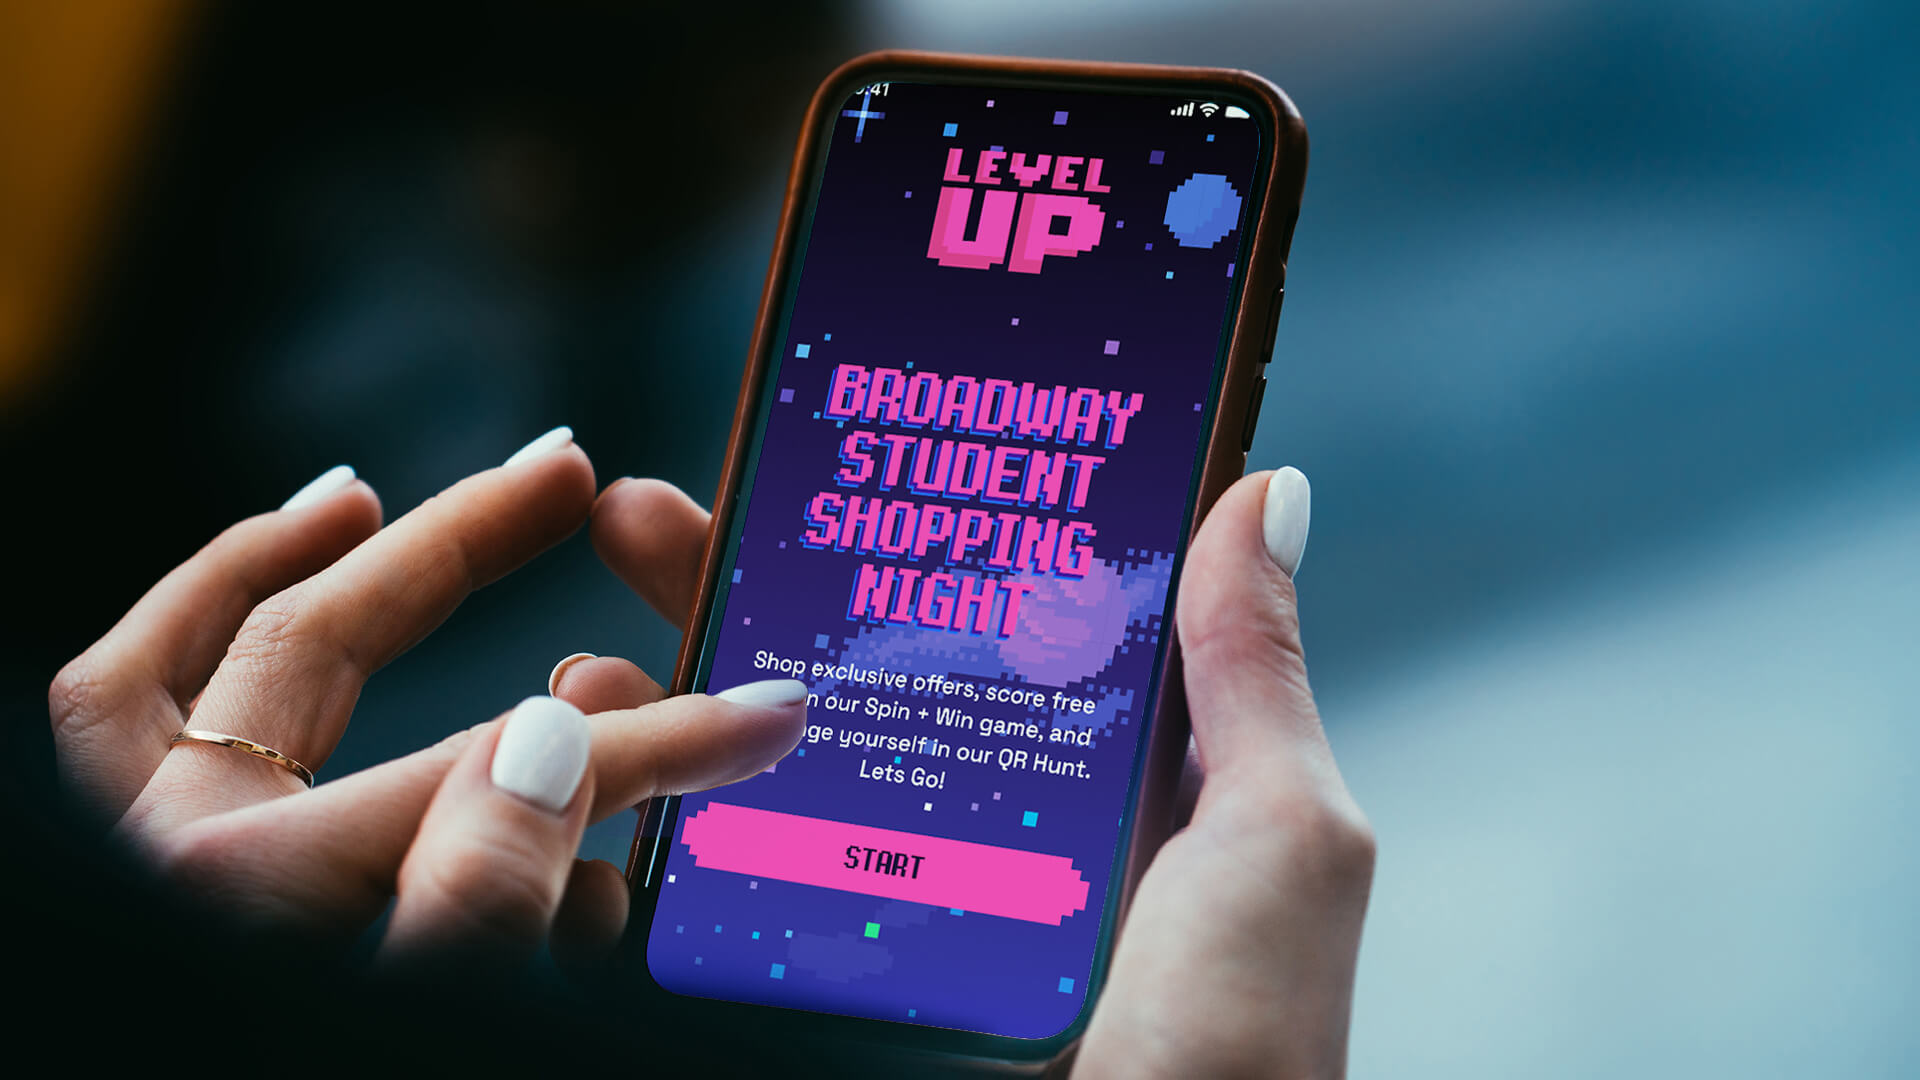 consumer holding a phone displaying branded design content for Broadway Student Shopping Night - Level Up experiential brand activation